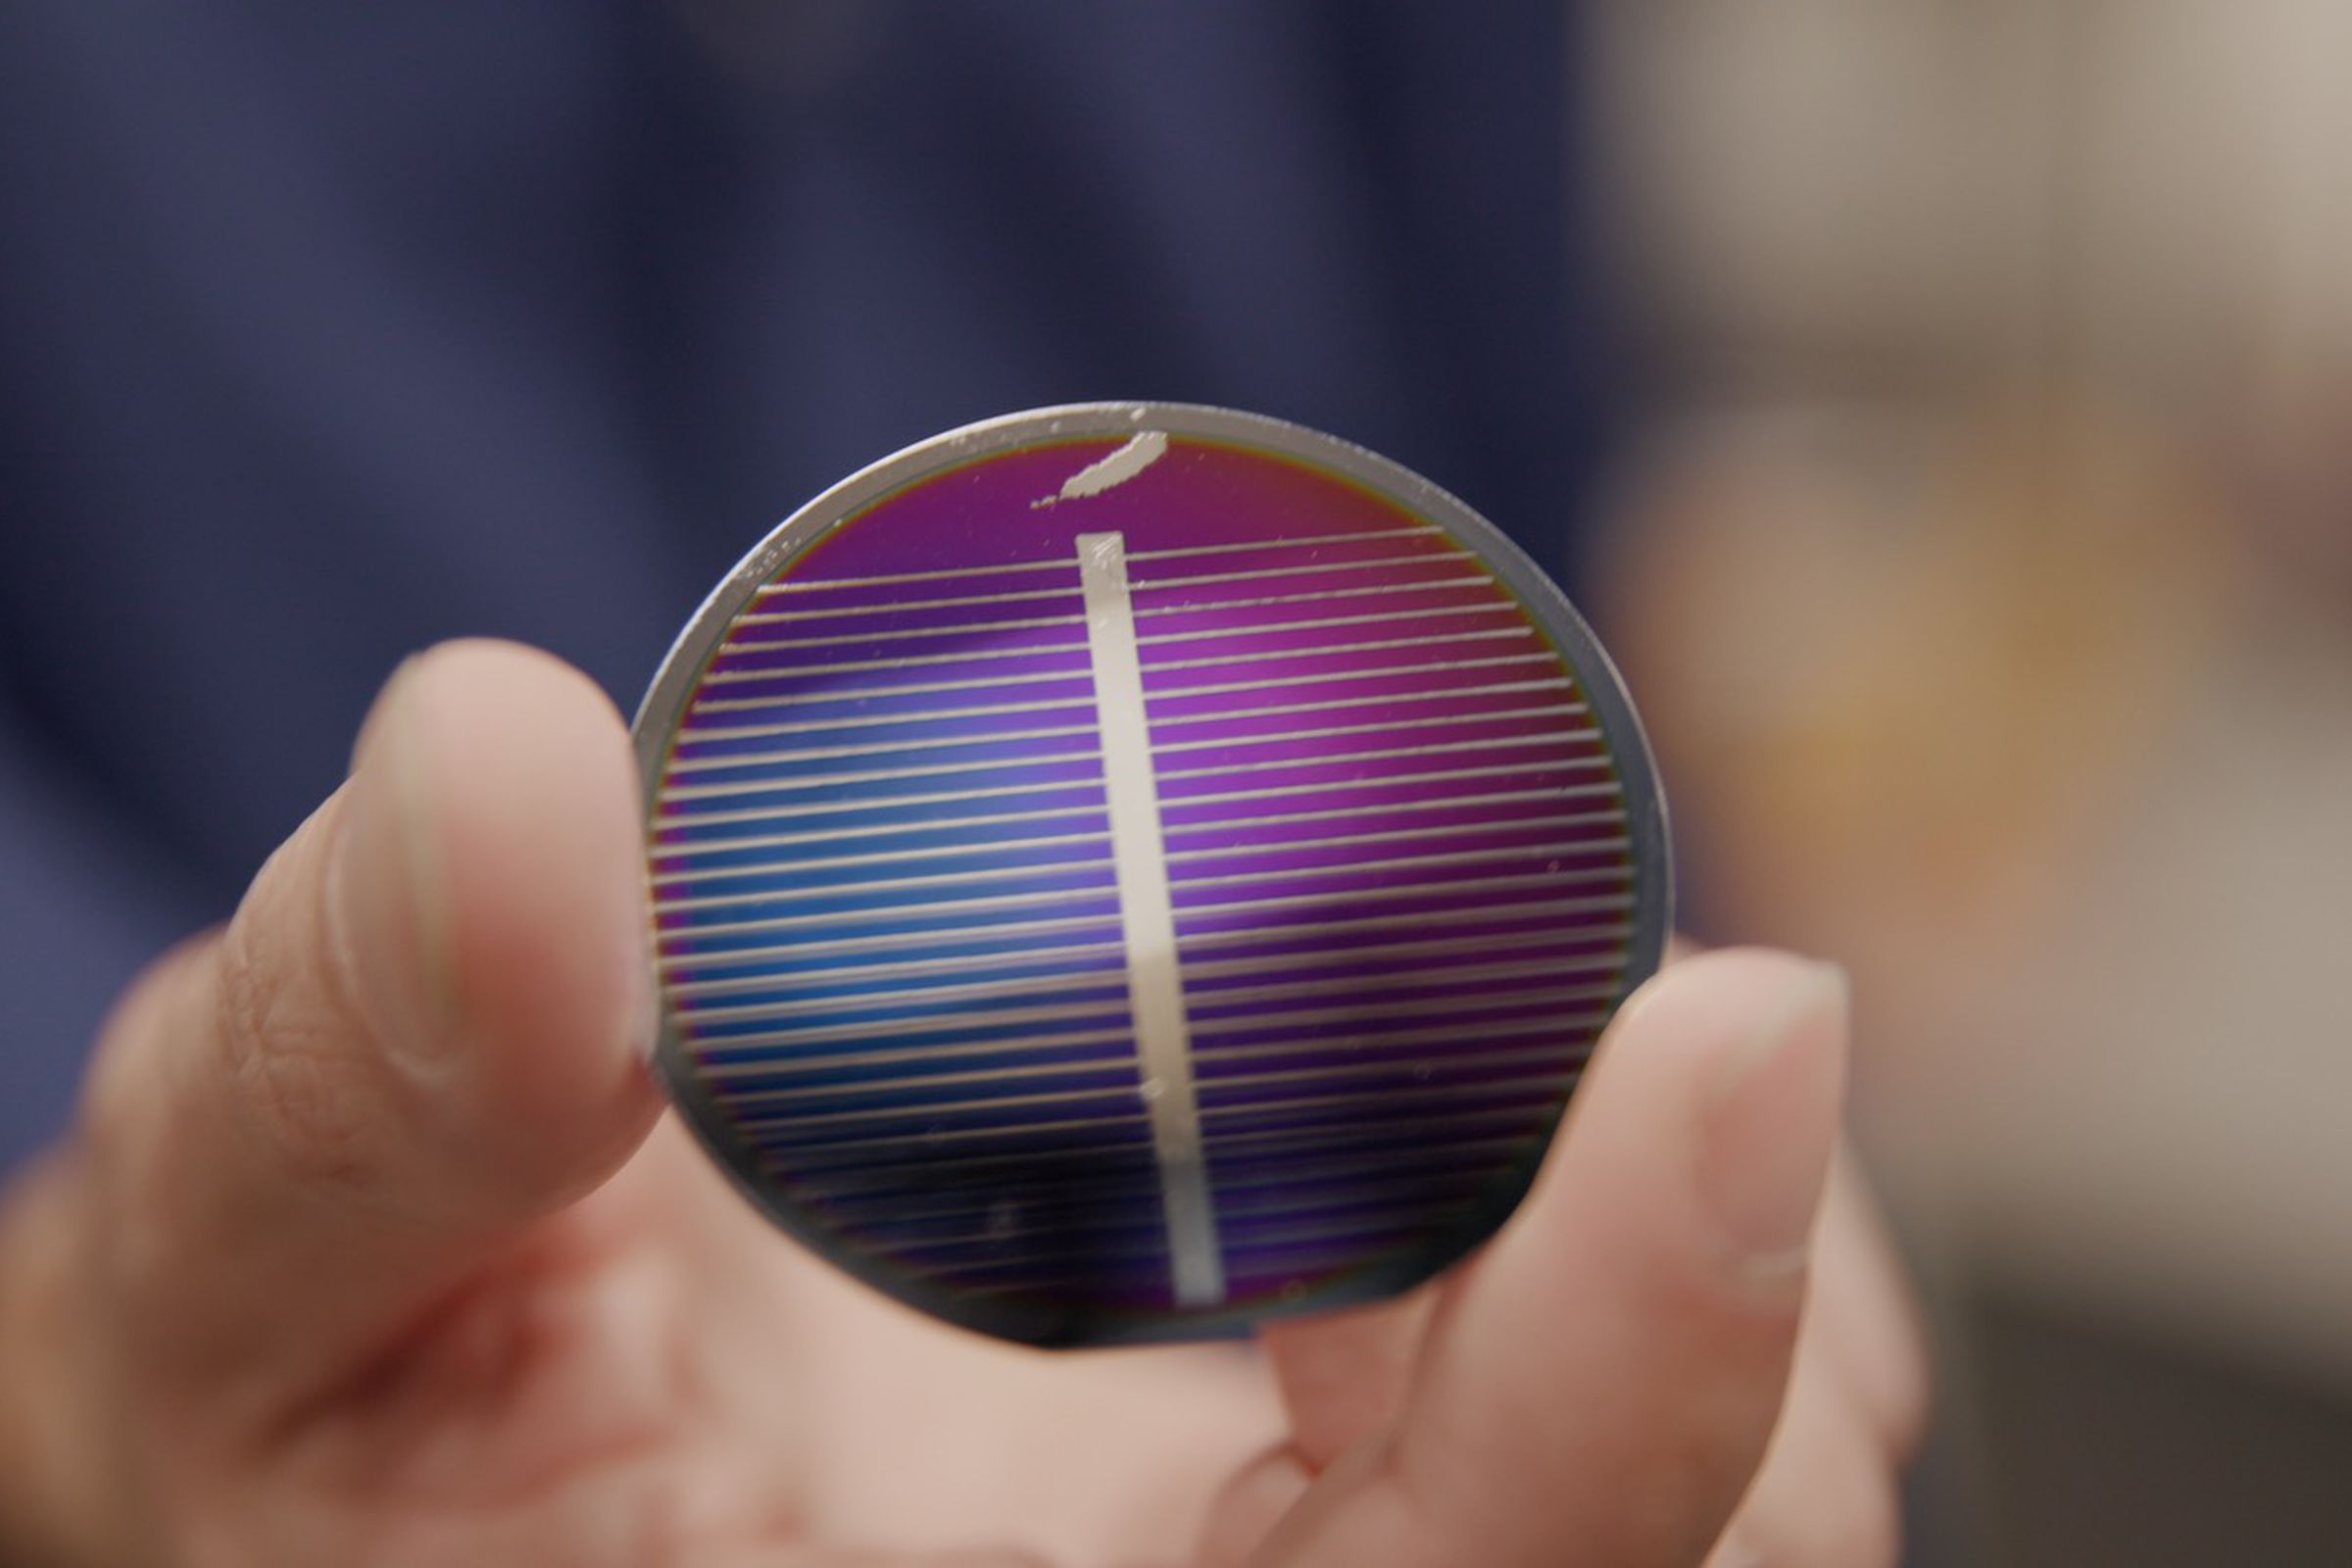 A close-up of a person’s hand holding a round solar cell.